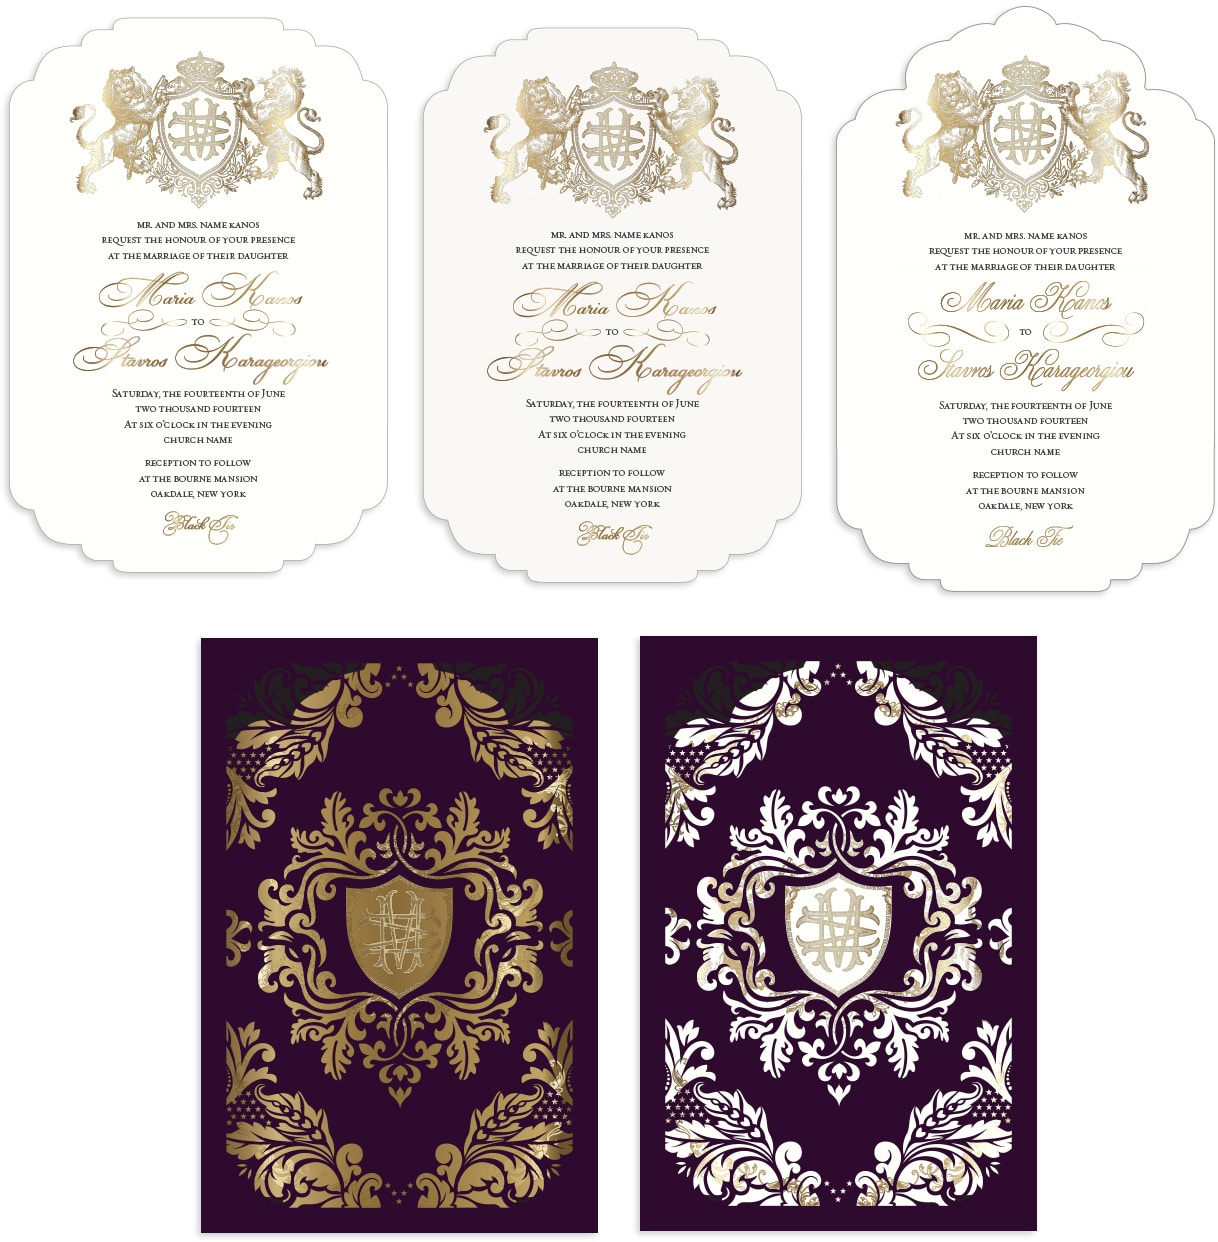 Ornate laser cut sleeve and invitation sketches